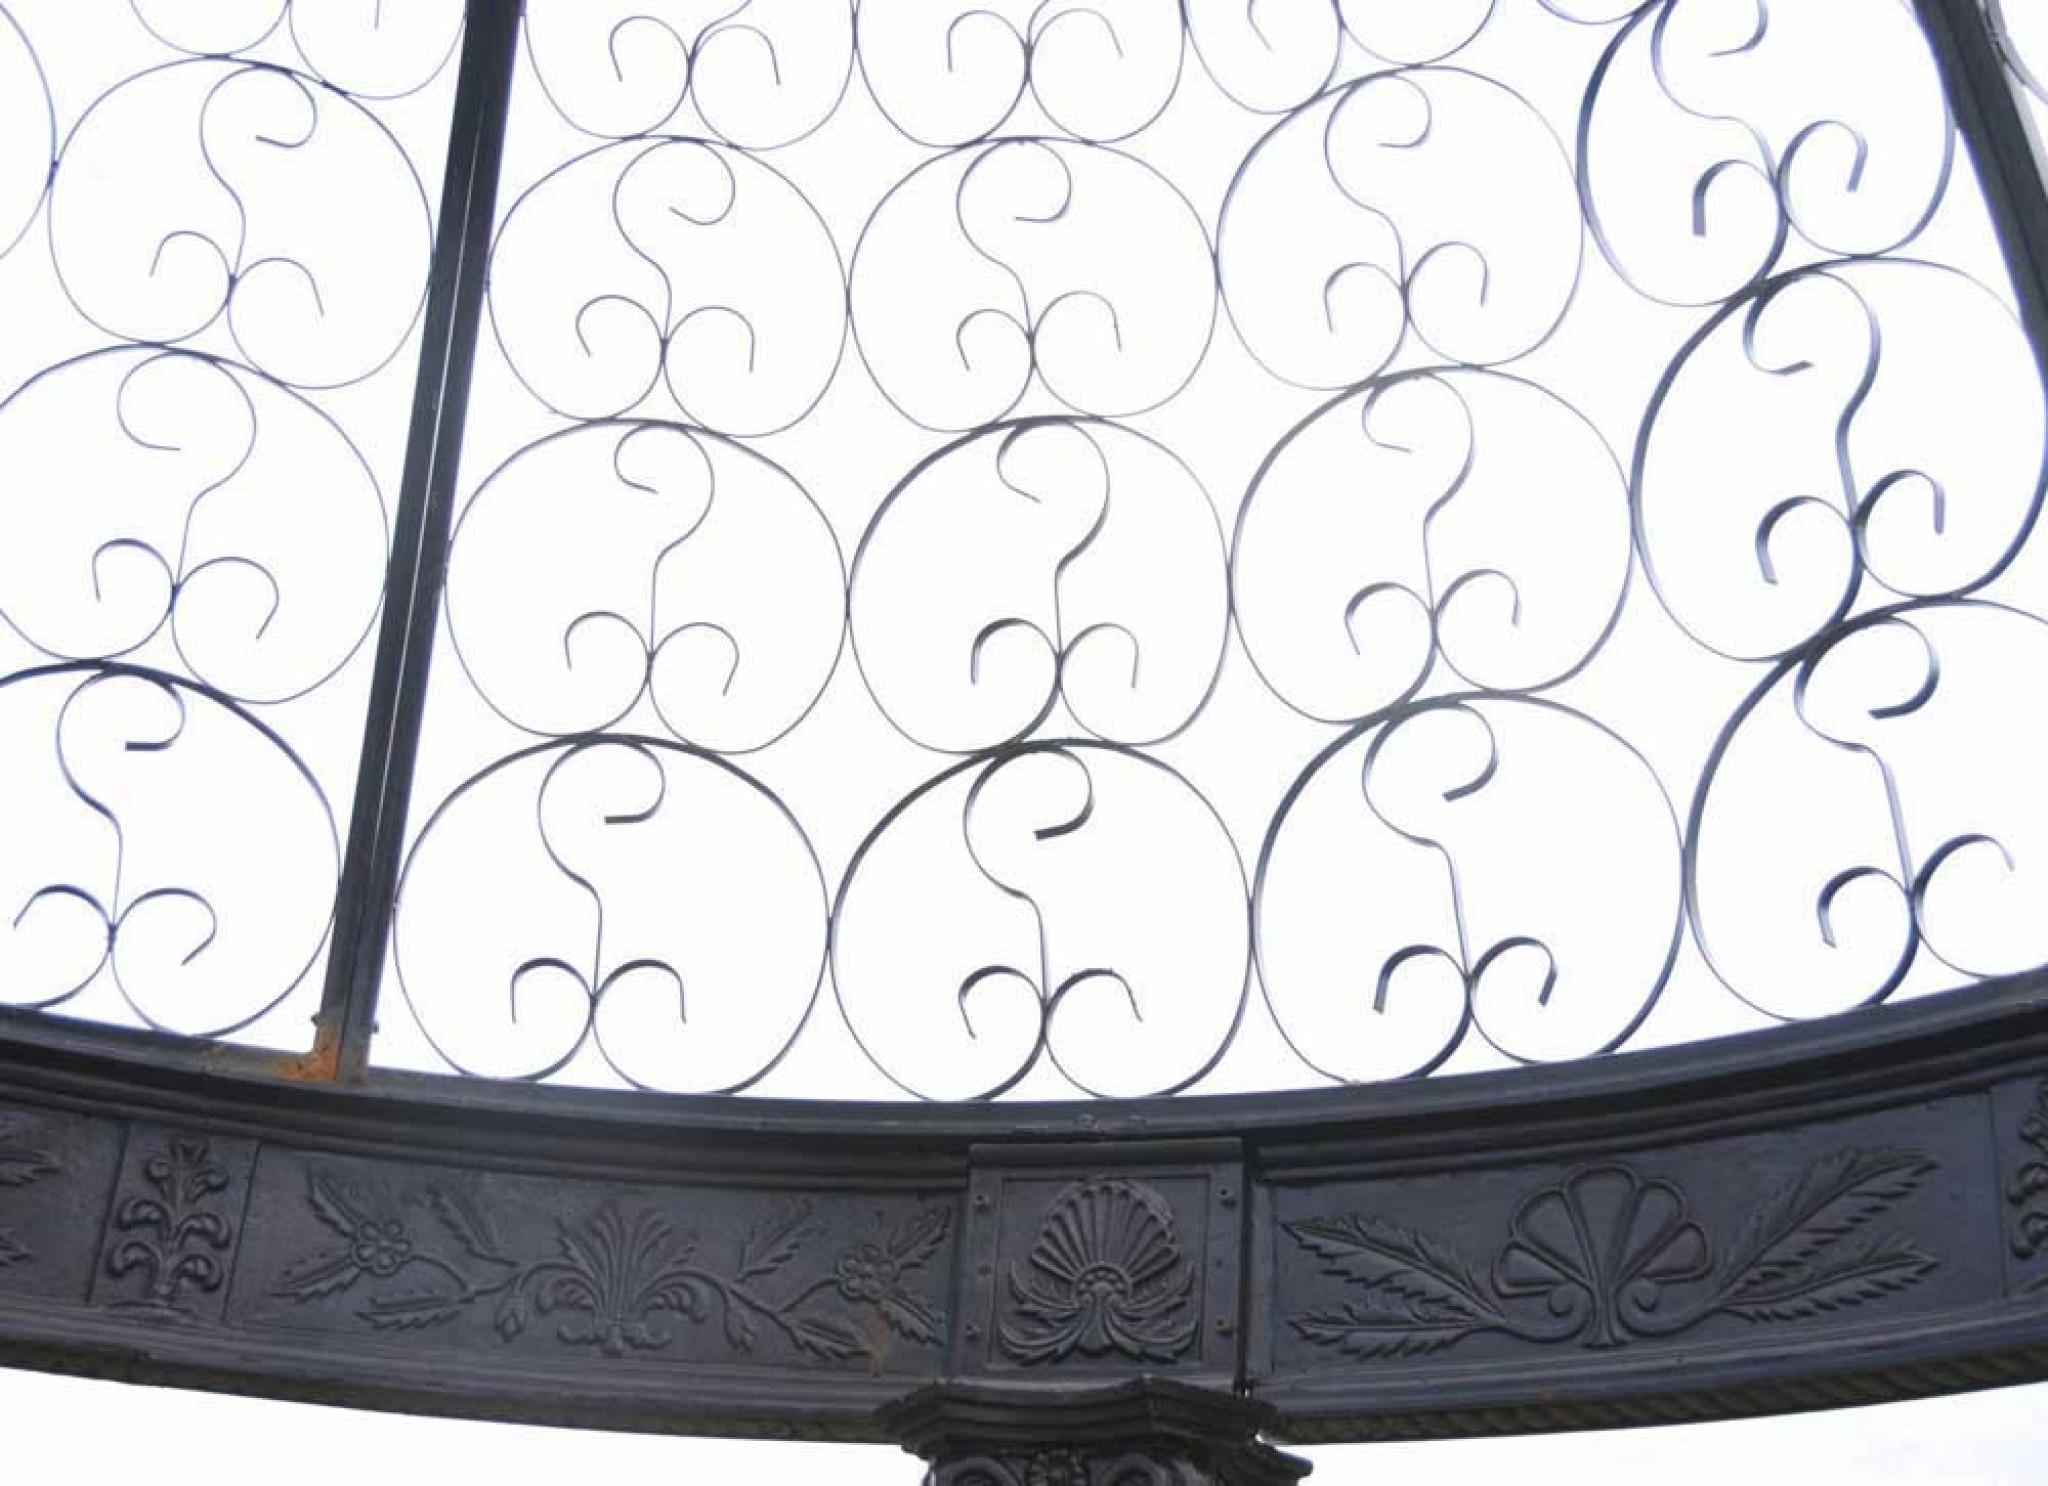 Late 20th Century Large Victorian Cast Iron Gazebo Architectural Garden Seat Dome Canopy For Sale